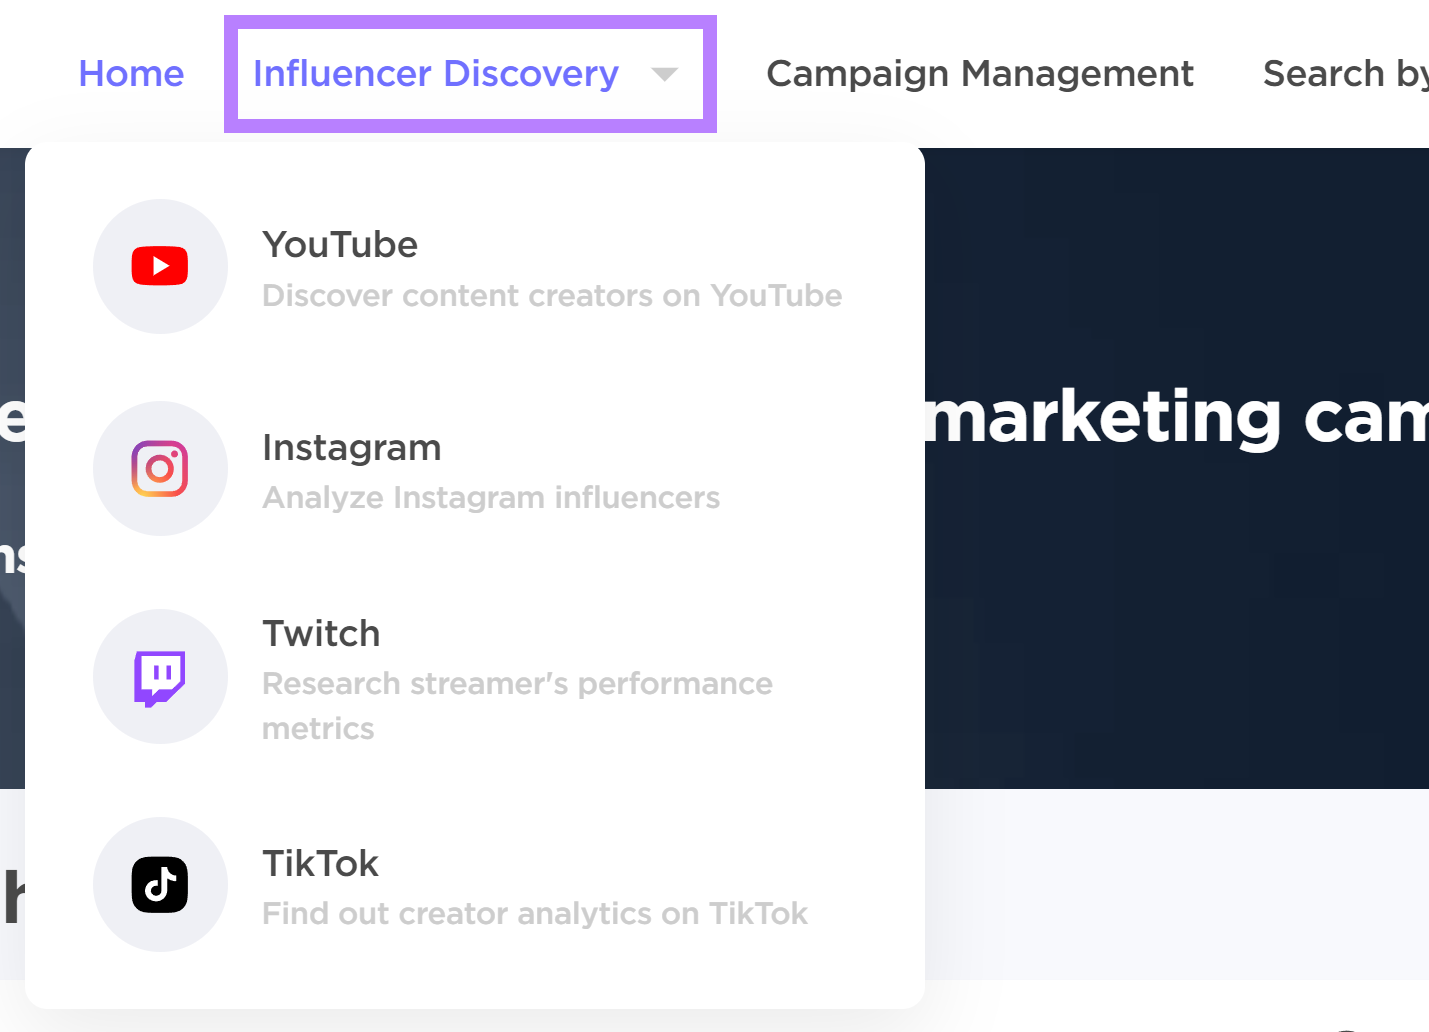 Semrush Influencer Analytics app header with Influencer Discovery menu item expanded and highlighted.